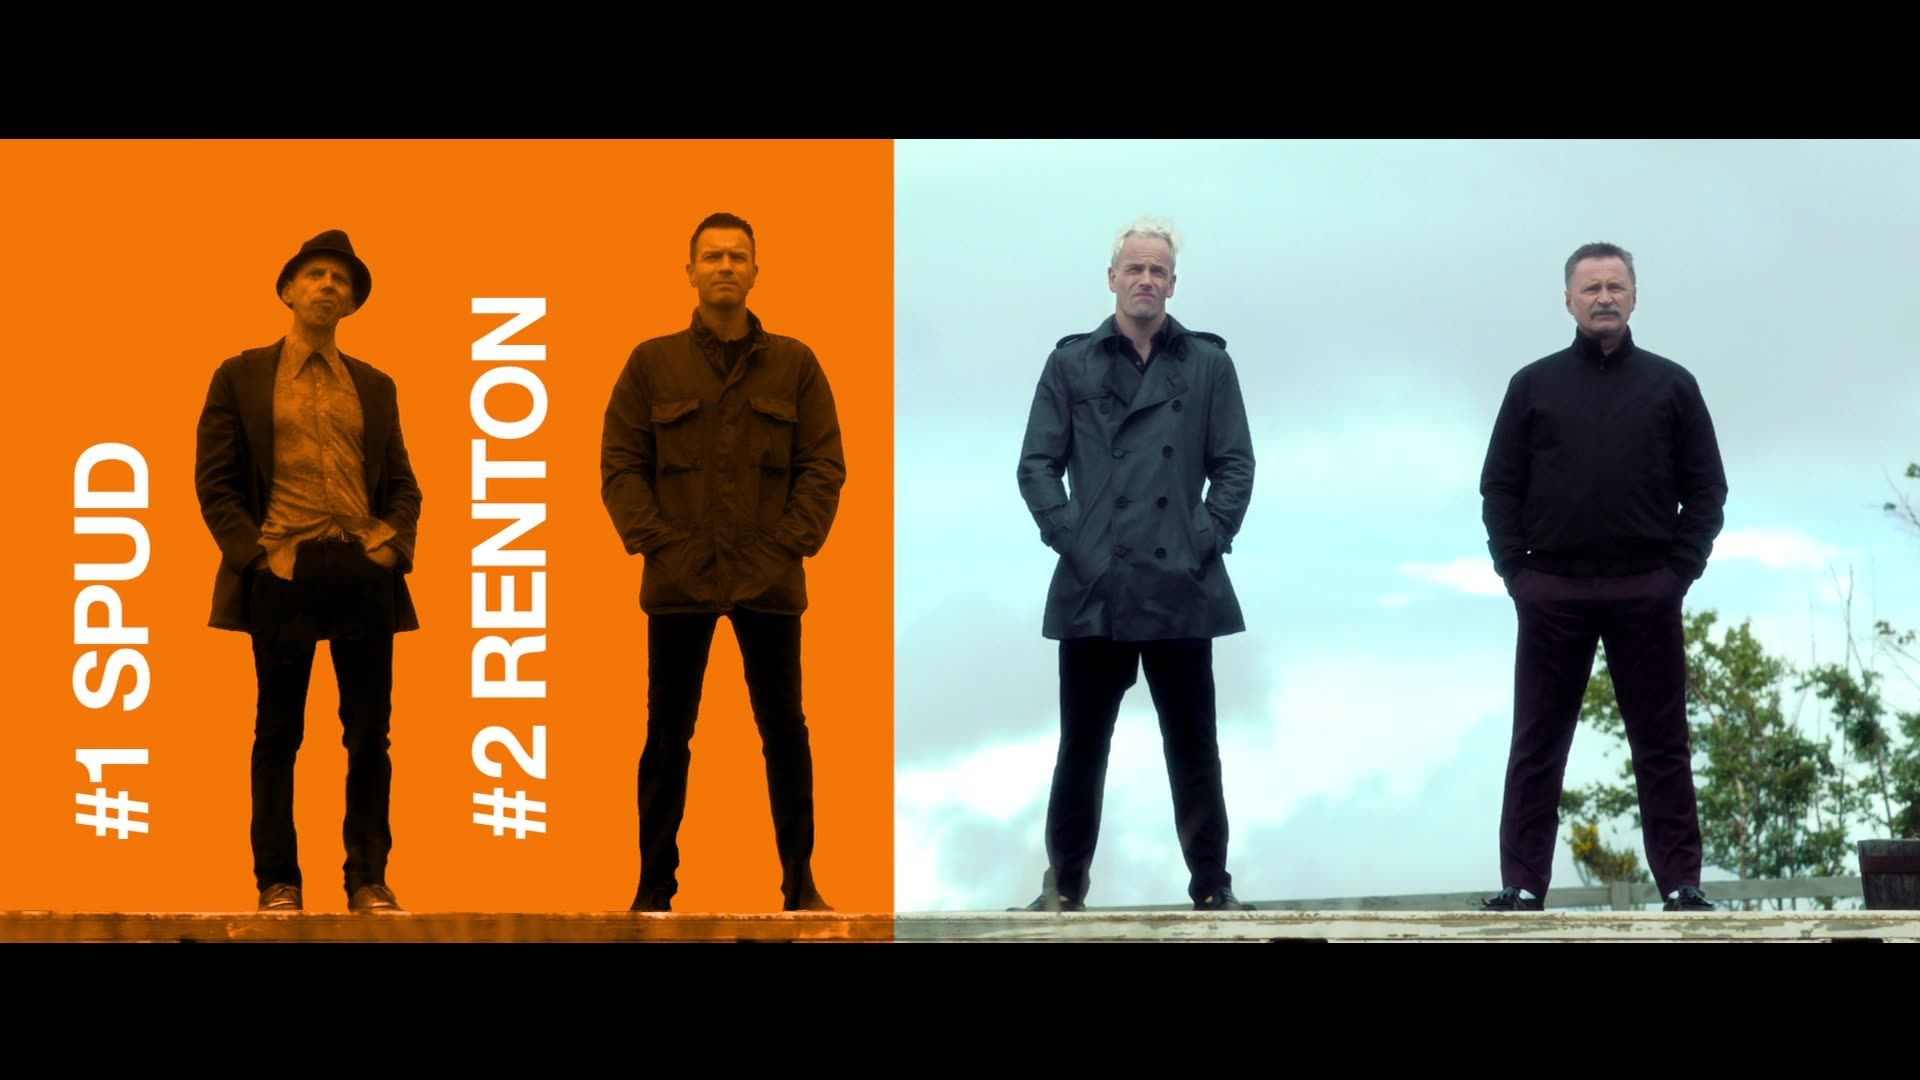 1920x1080 T2: Trainspotting 2 Wallpapers T2: Trainspotting 2 widescreen wallpapers